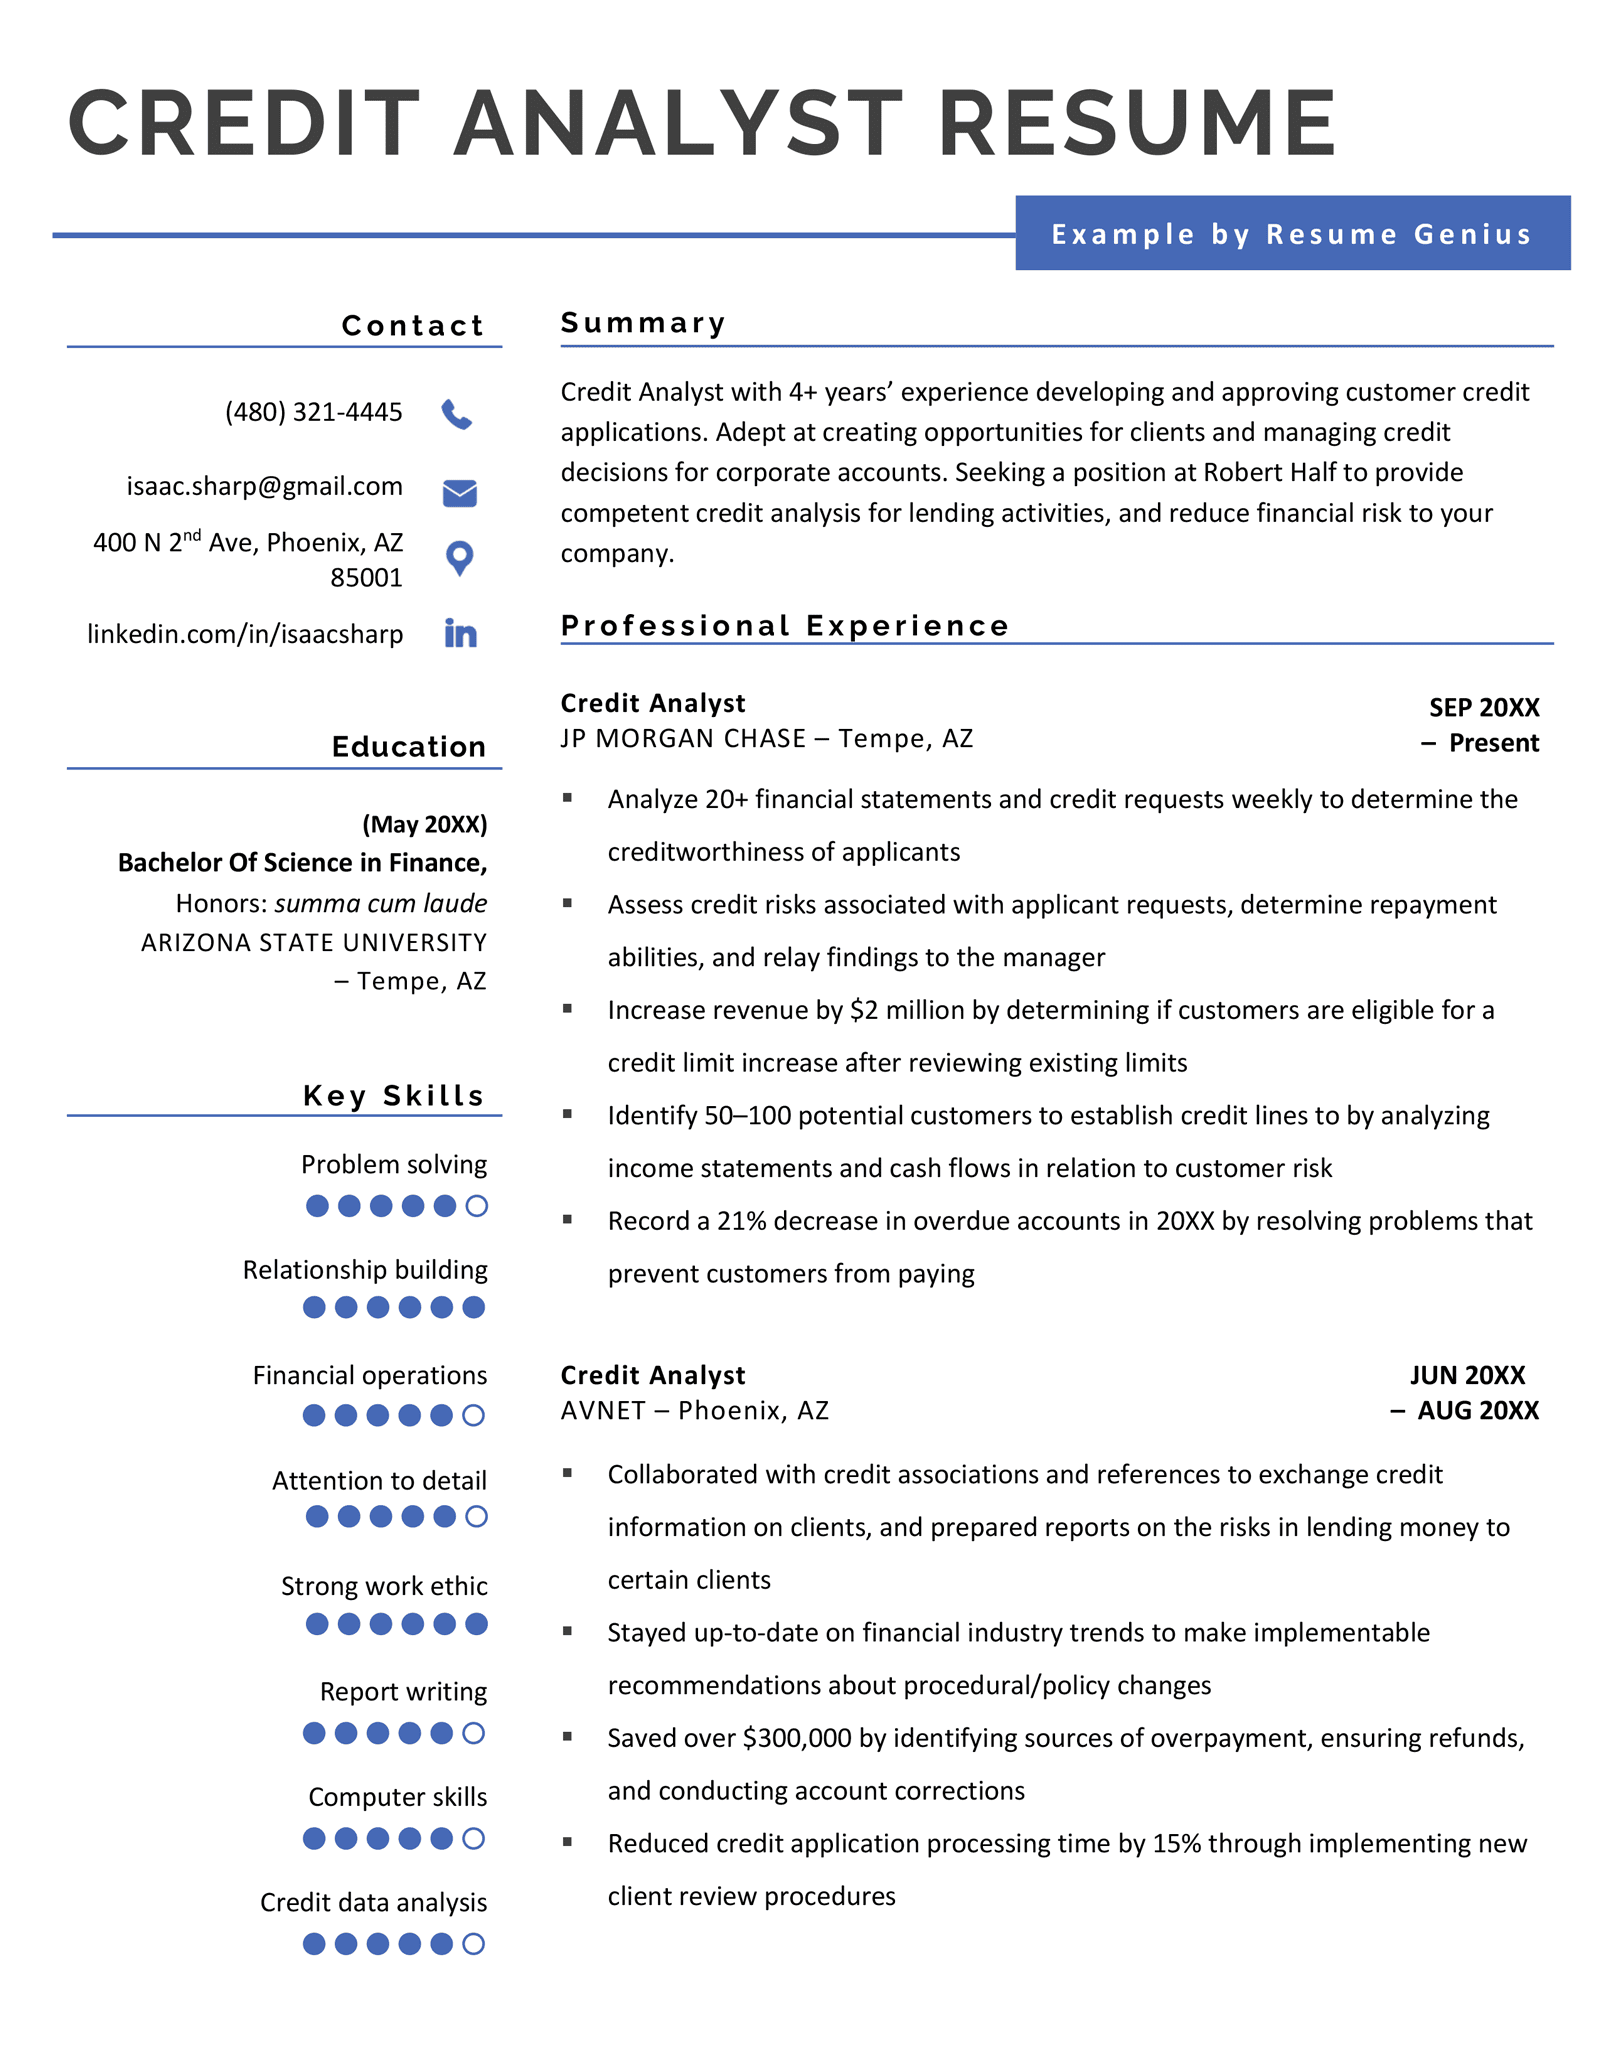 A credit analyst resume example using a blue color scheme and a skills section using a six point rating scale